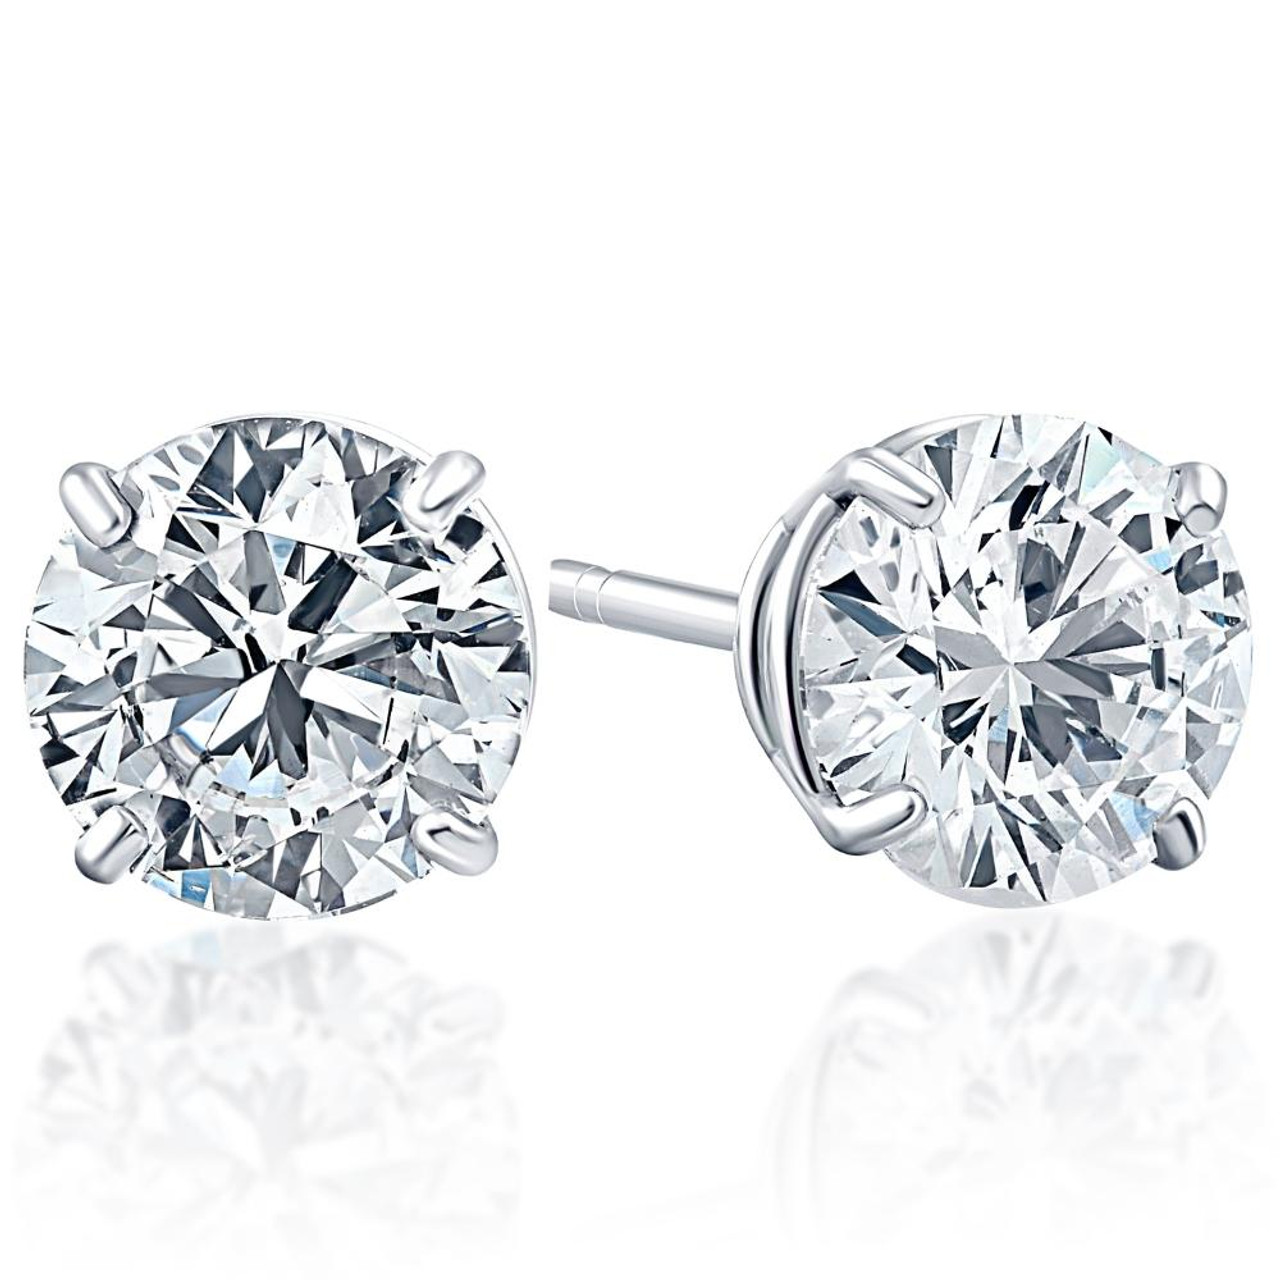 2ct VS Quality Round Brilliant Cut Natural Diamond Stud Earrings In ...